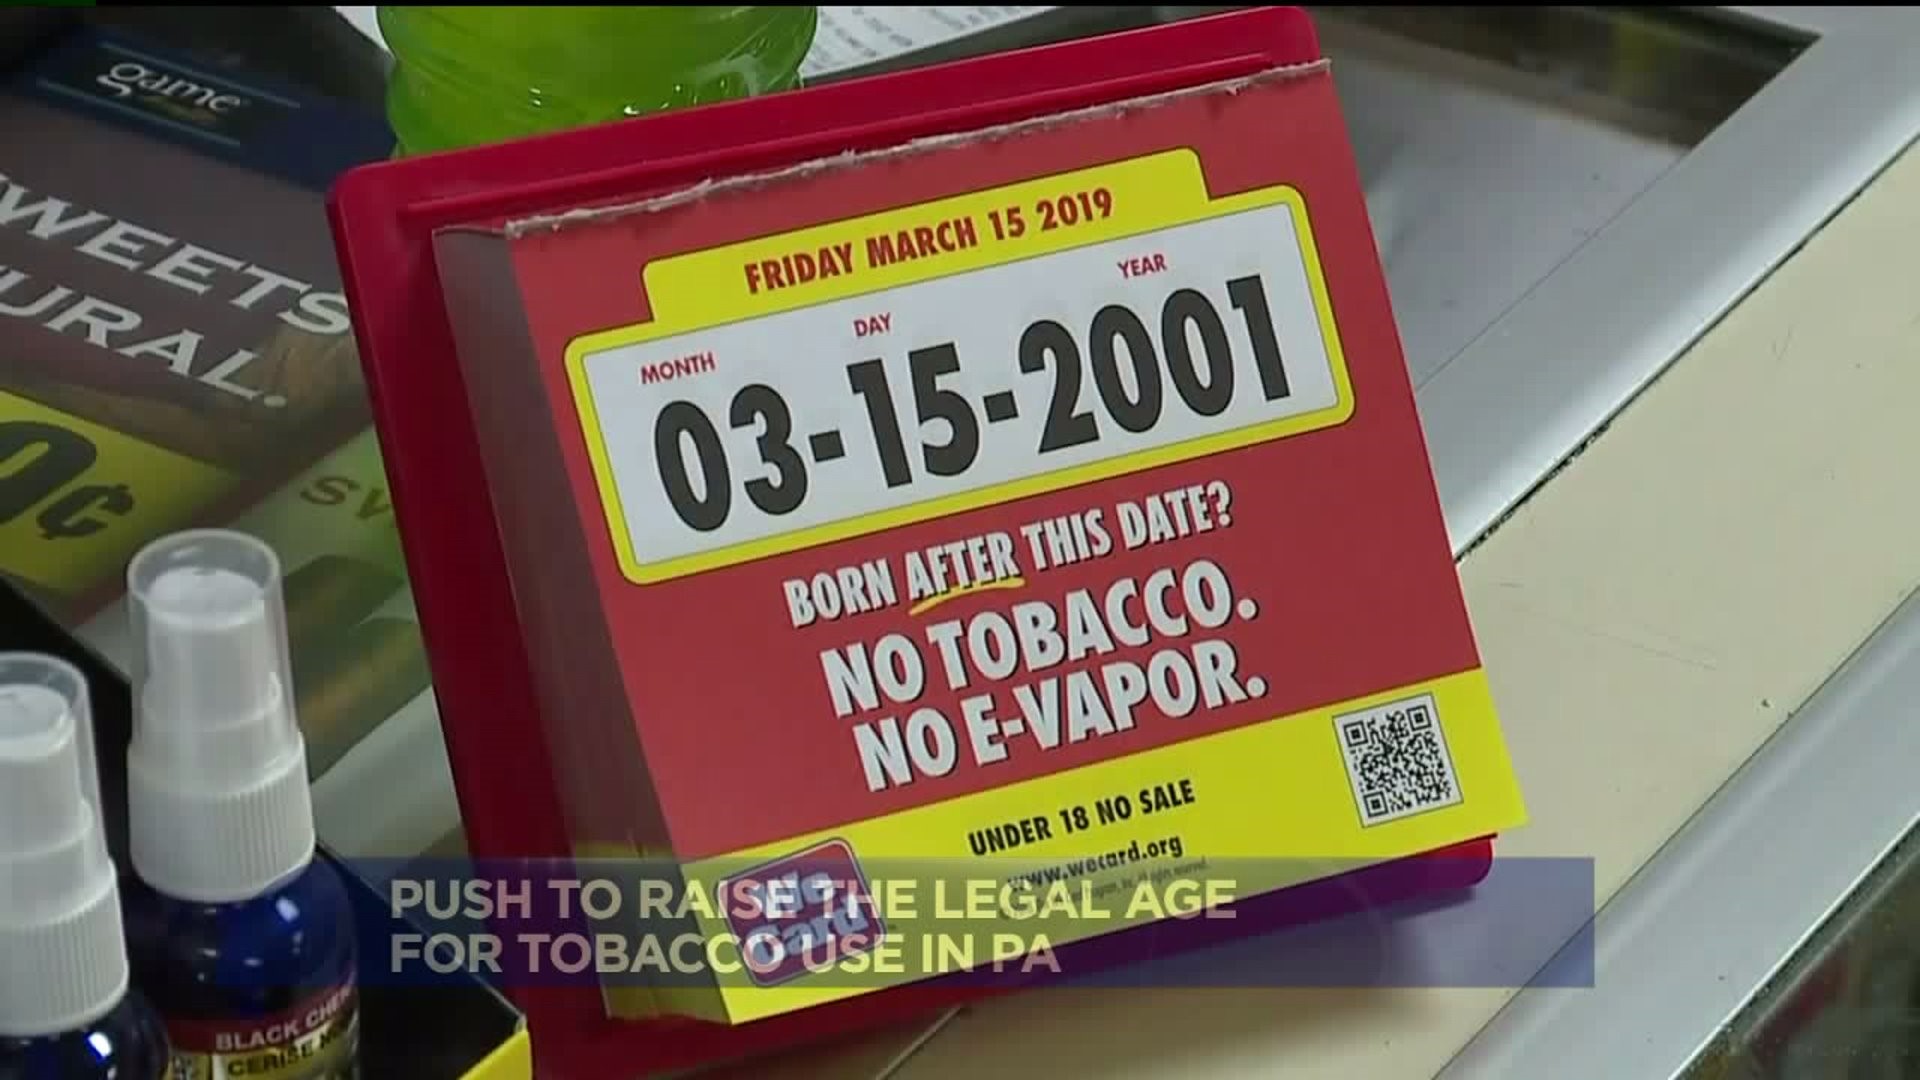 Seeking to Raise Legal Age of Tobacco Use